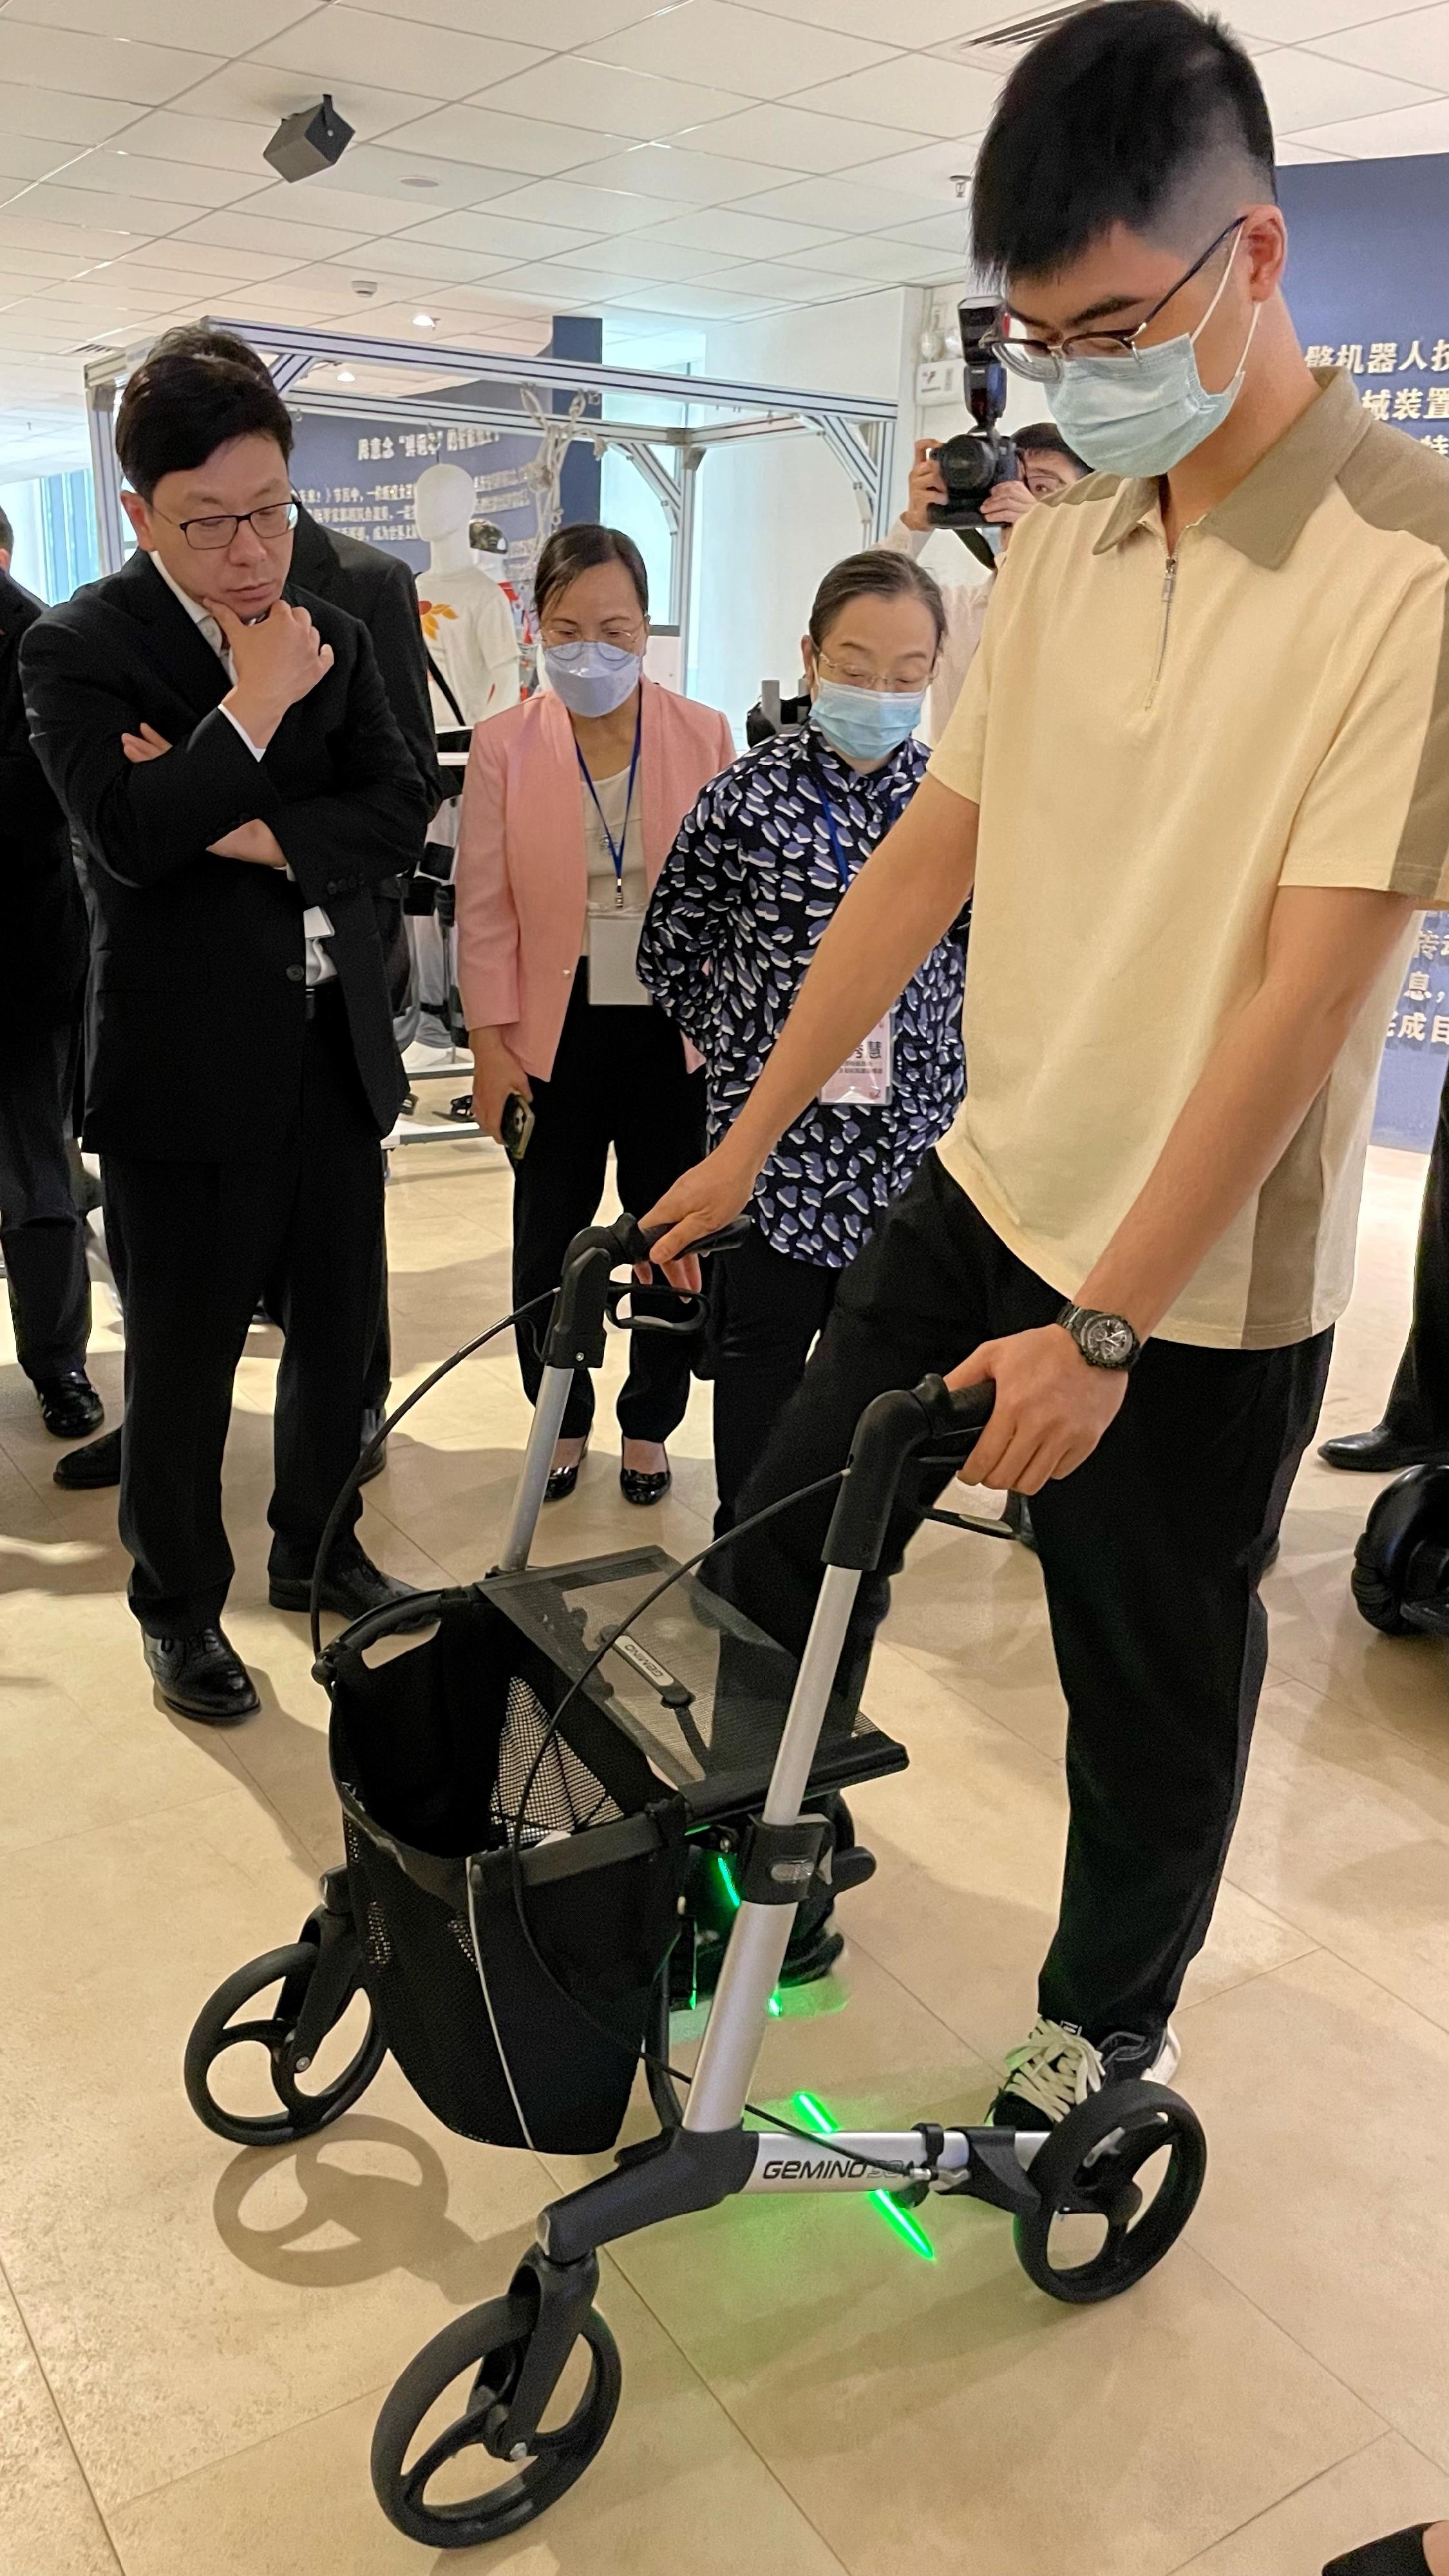 The Secretary for Labour and Welfare, Mr Chris Sun, led the Hong Kong social welfare sector delegation on a visit to Guangdong and visited the Guangdong Provincial Cultural Sports and Rehabilitation Assistive Devices Center for People with Disabilities yesterday morning (April 25). Photo shows Mr Sun (back row, left) observing how a rollator works.